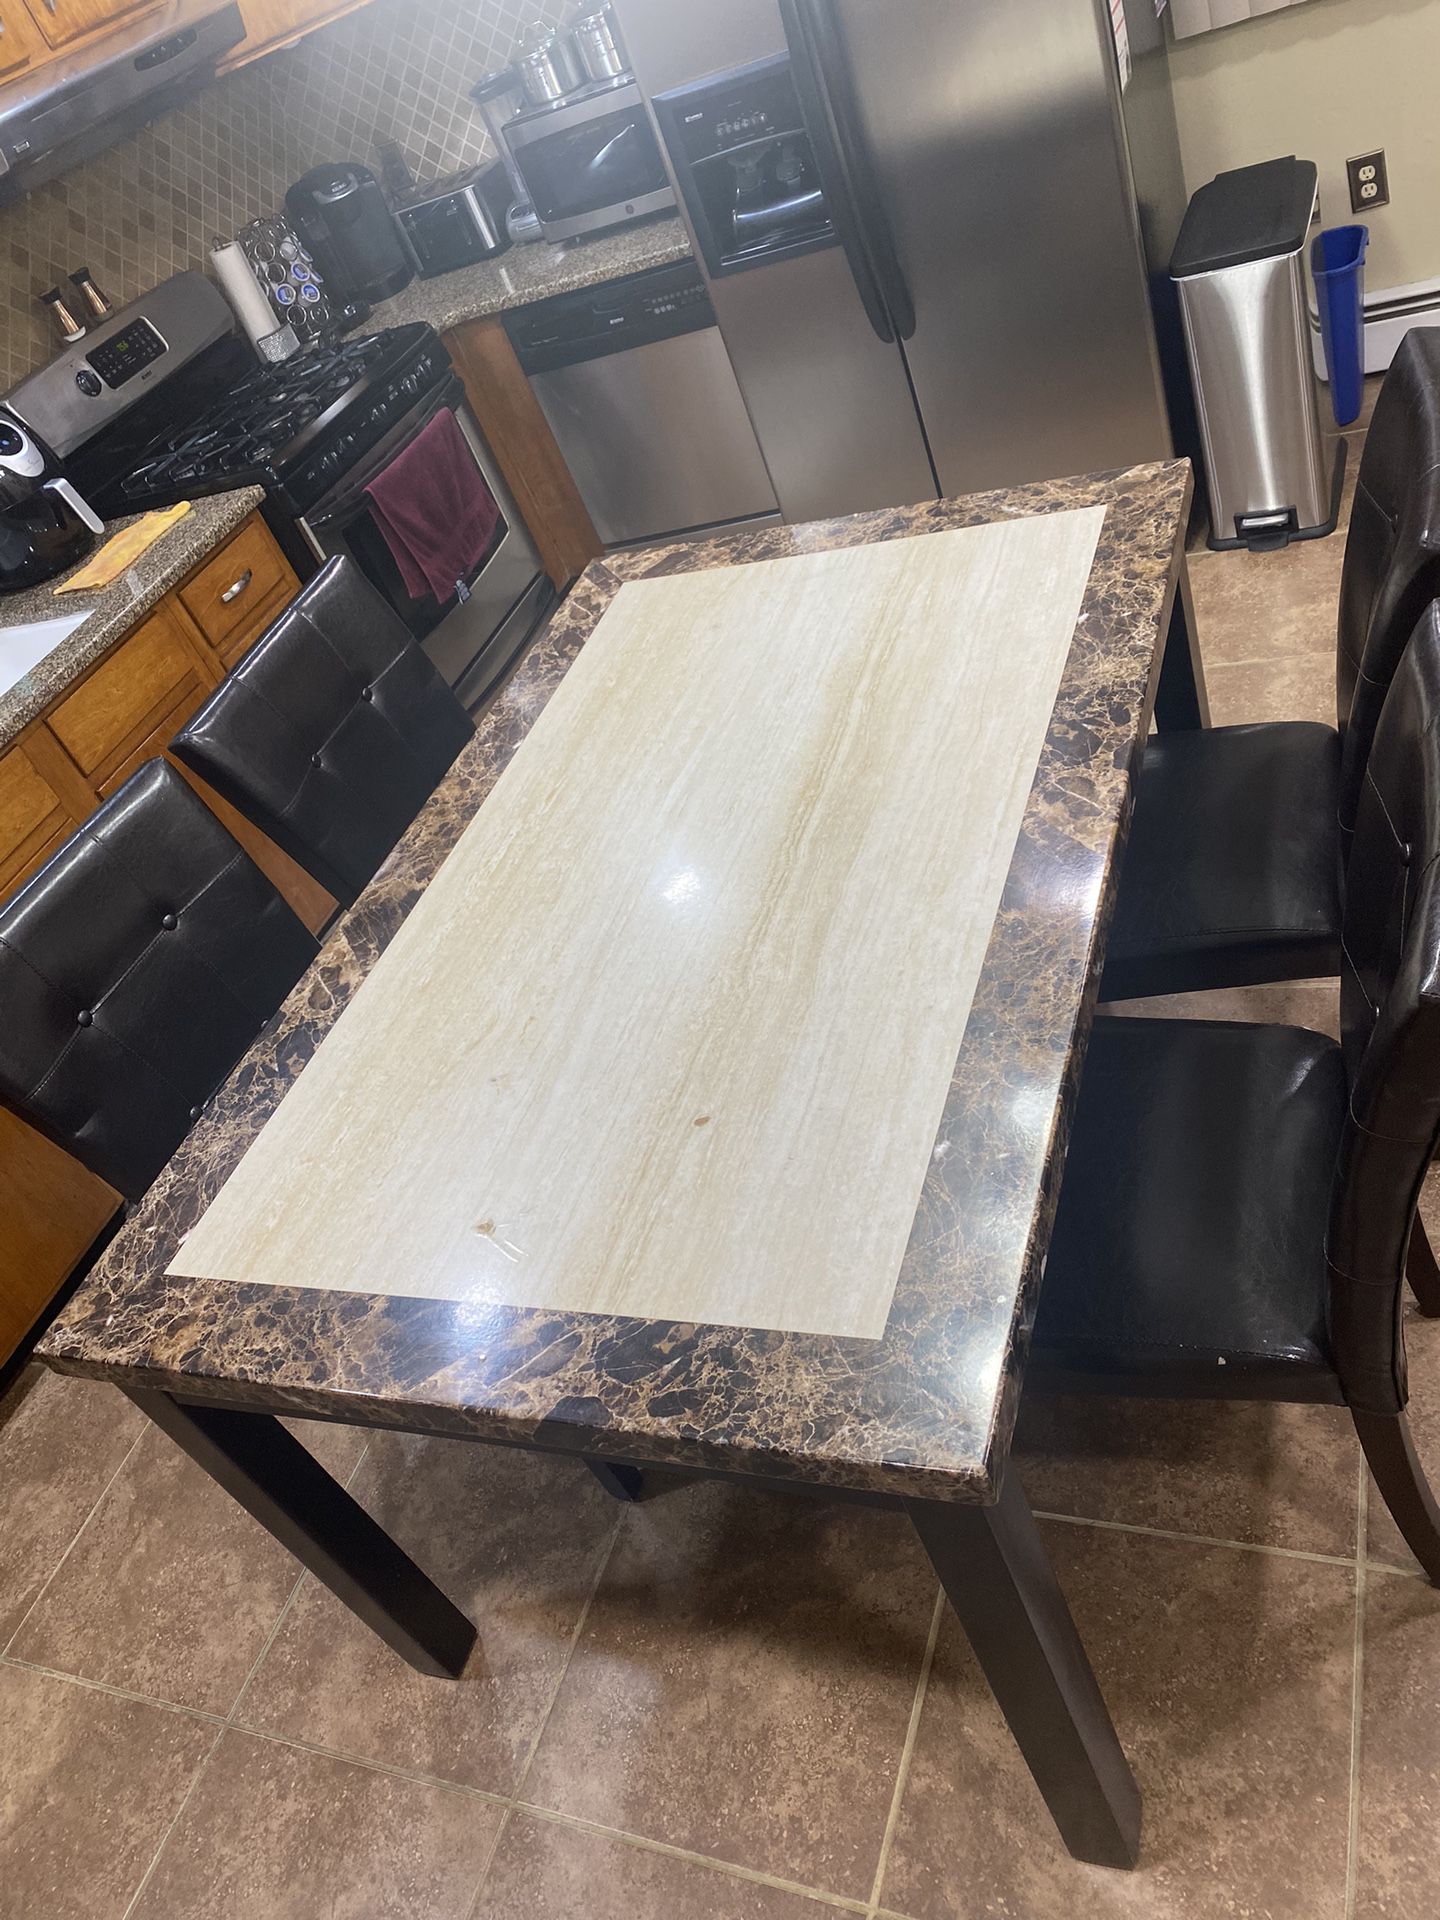 Kitchen table with chairs include: